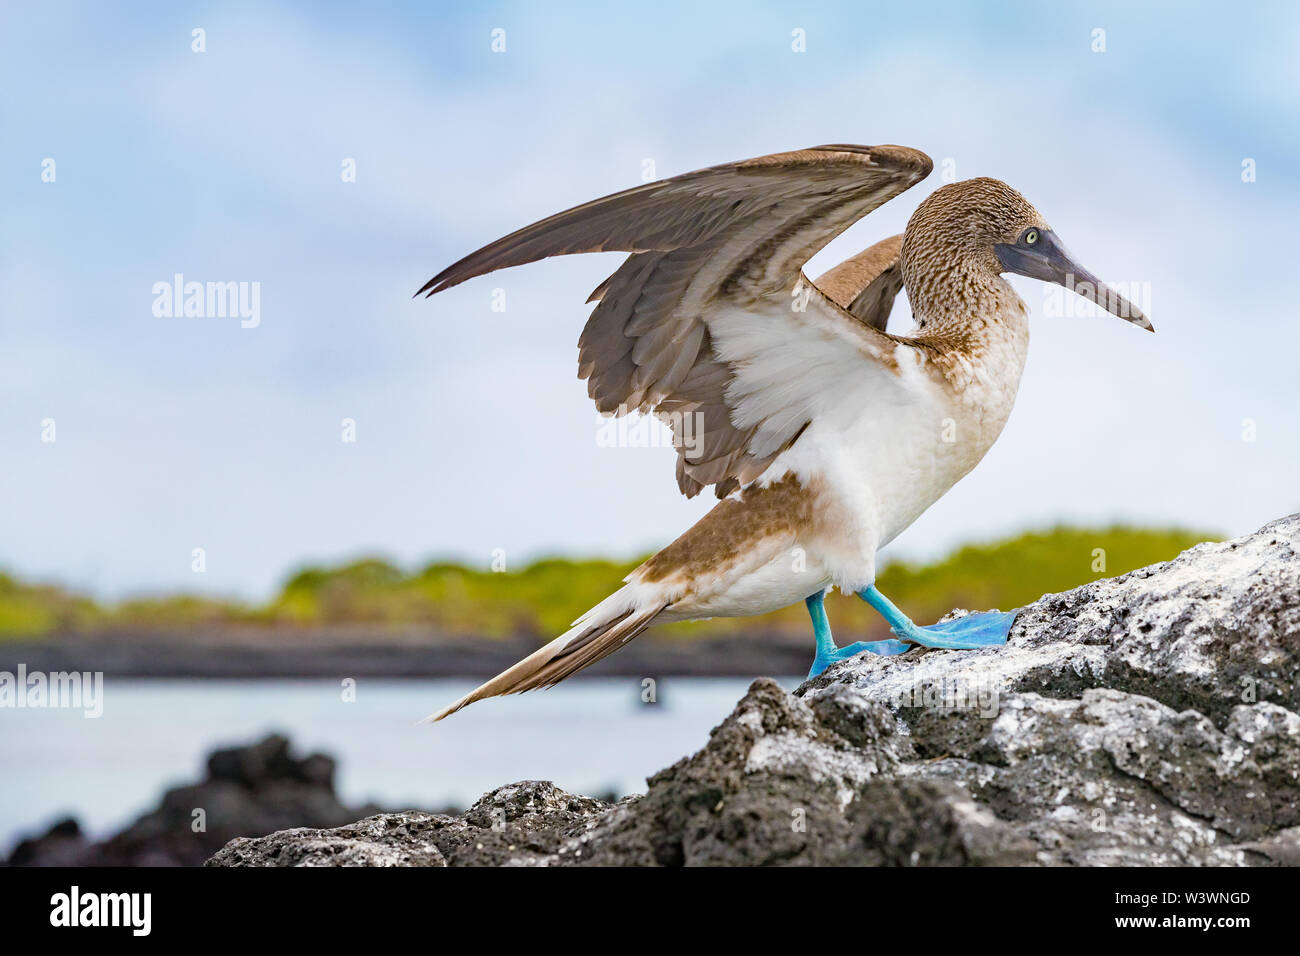 Galapagos animals. Blue-footed Booby - Iconic and famous galapagos animals and wildlife. Blue footed boobies are native to the Galapagos Islands, Ecuador, South America. Stock Photo